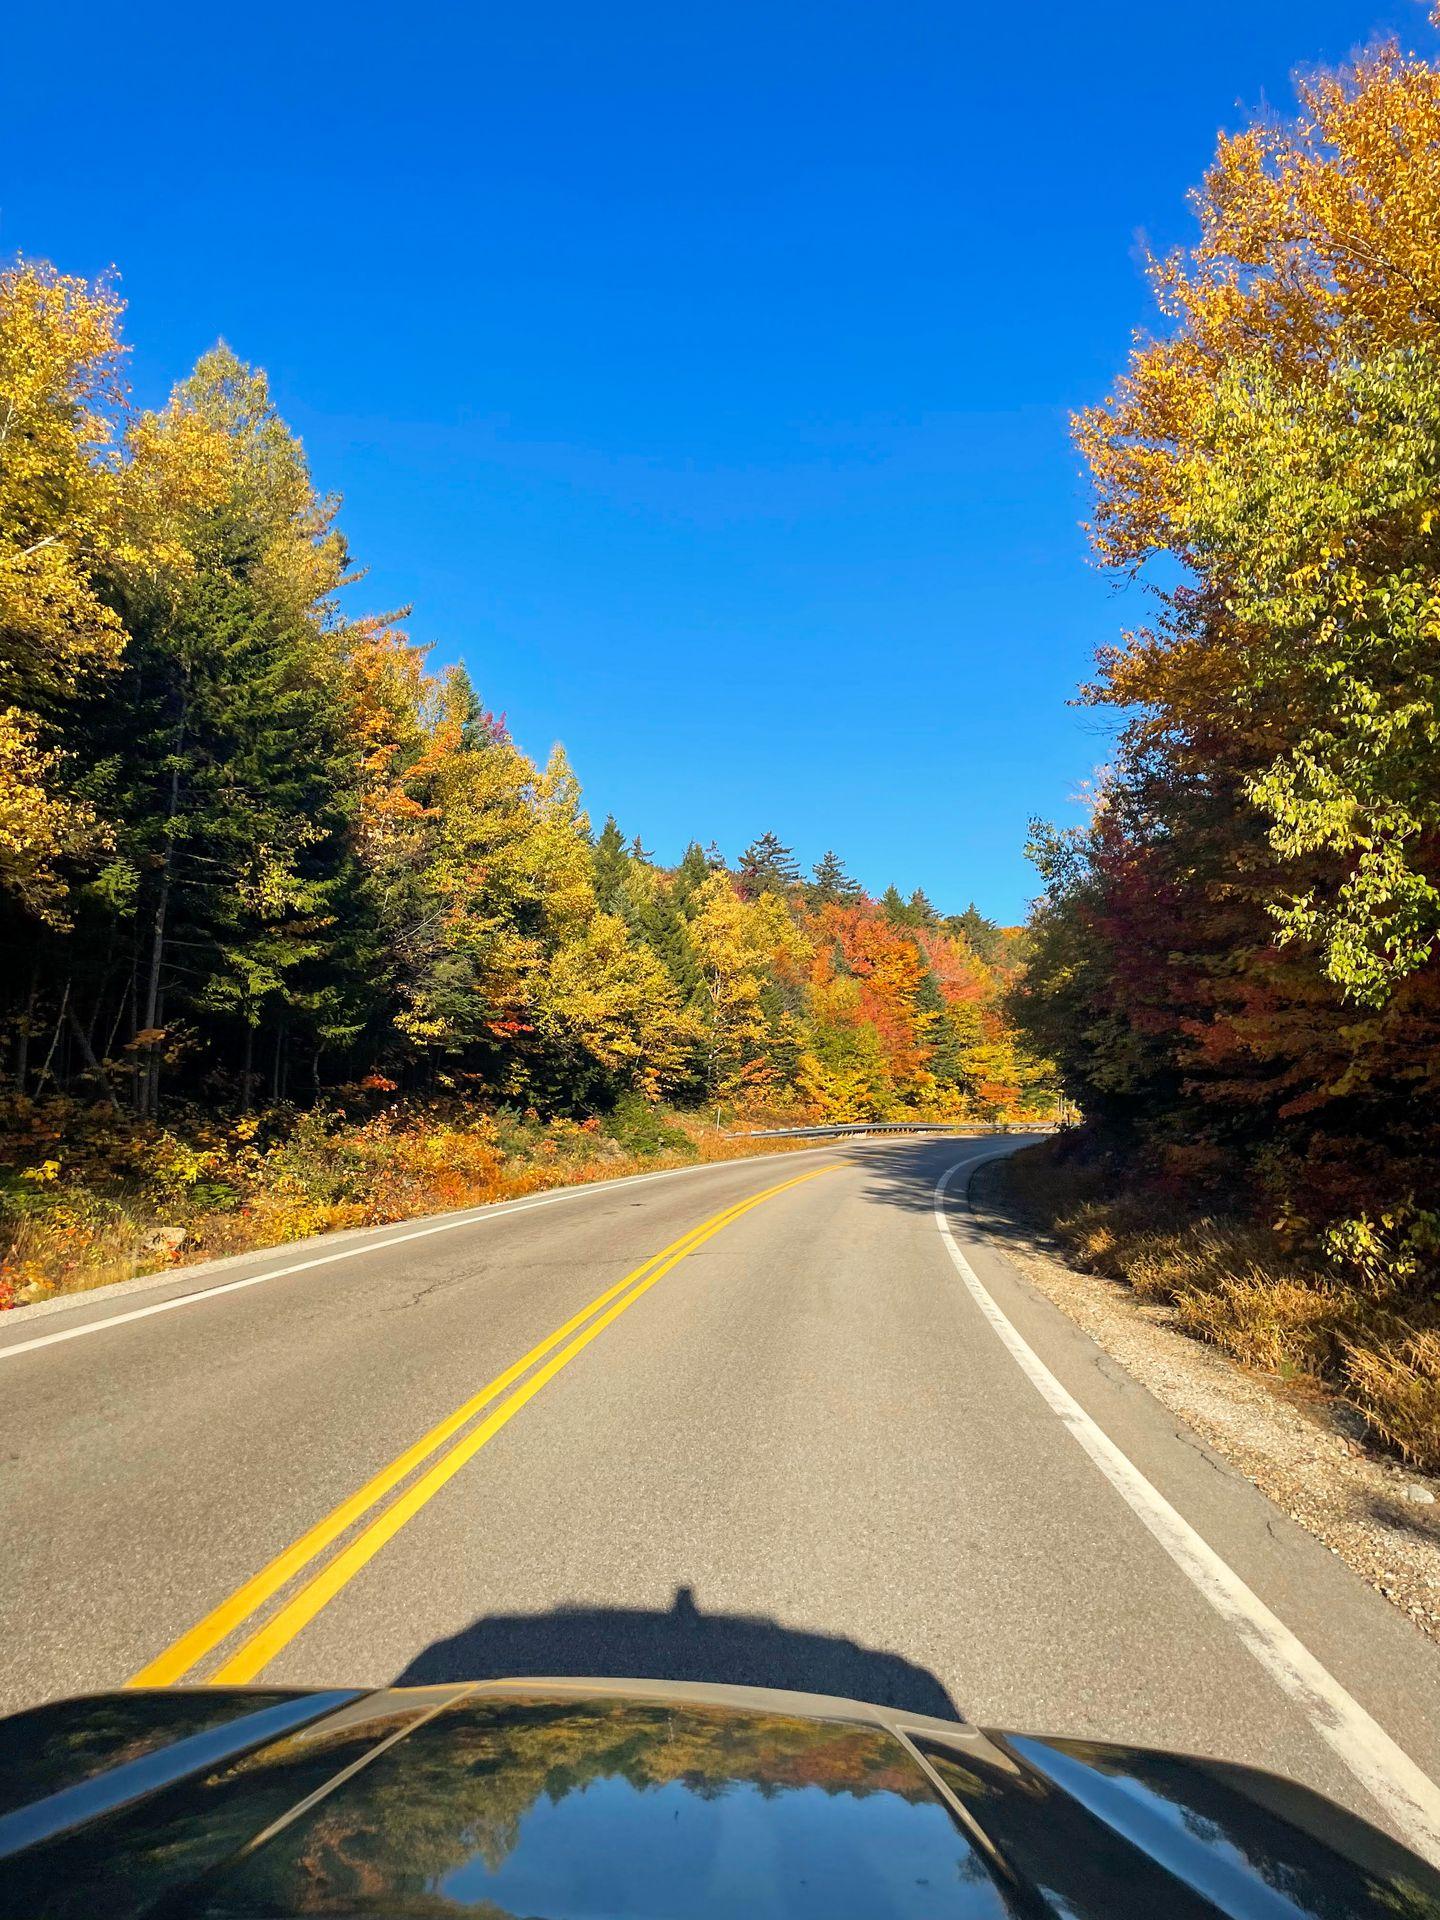 Driving the Kancamagus Highway. The road is surrounded by colorful trees.